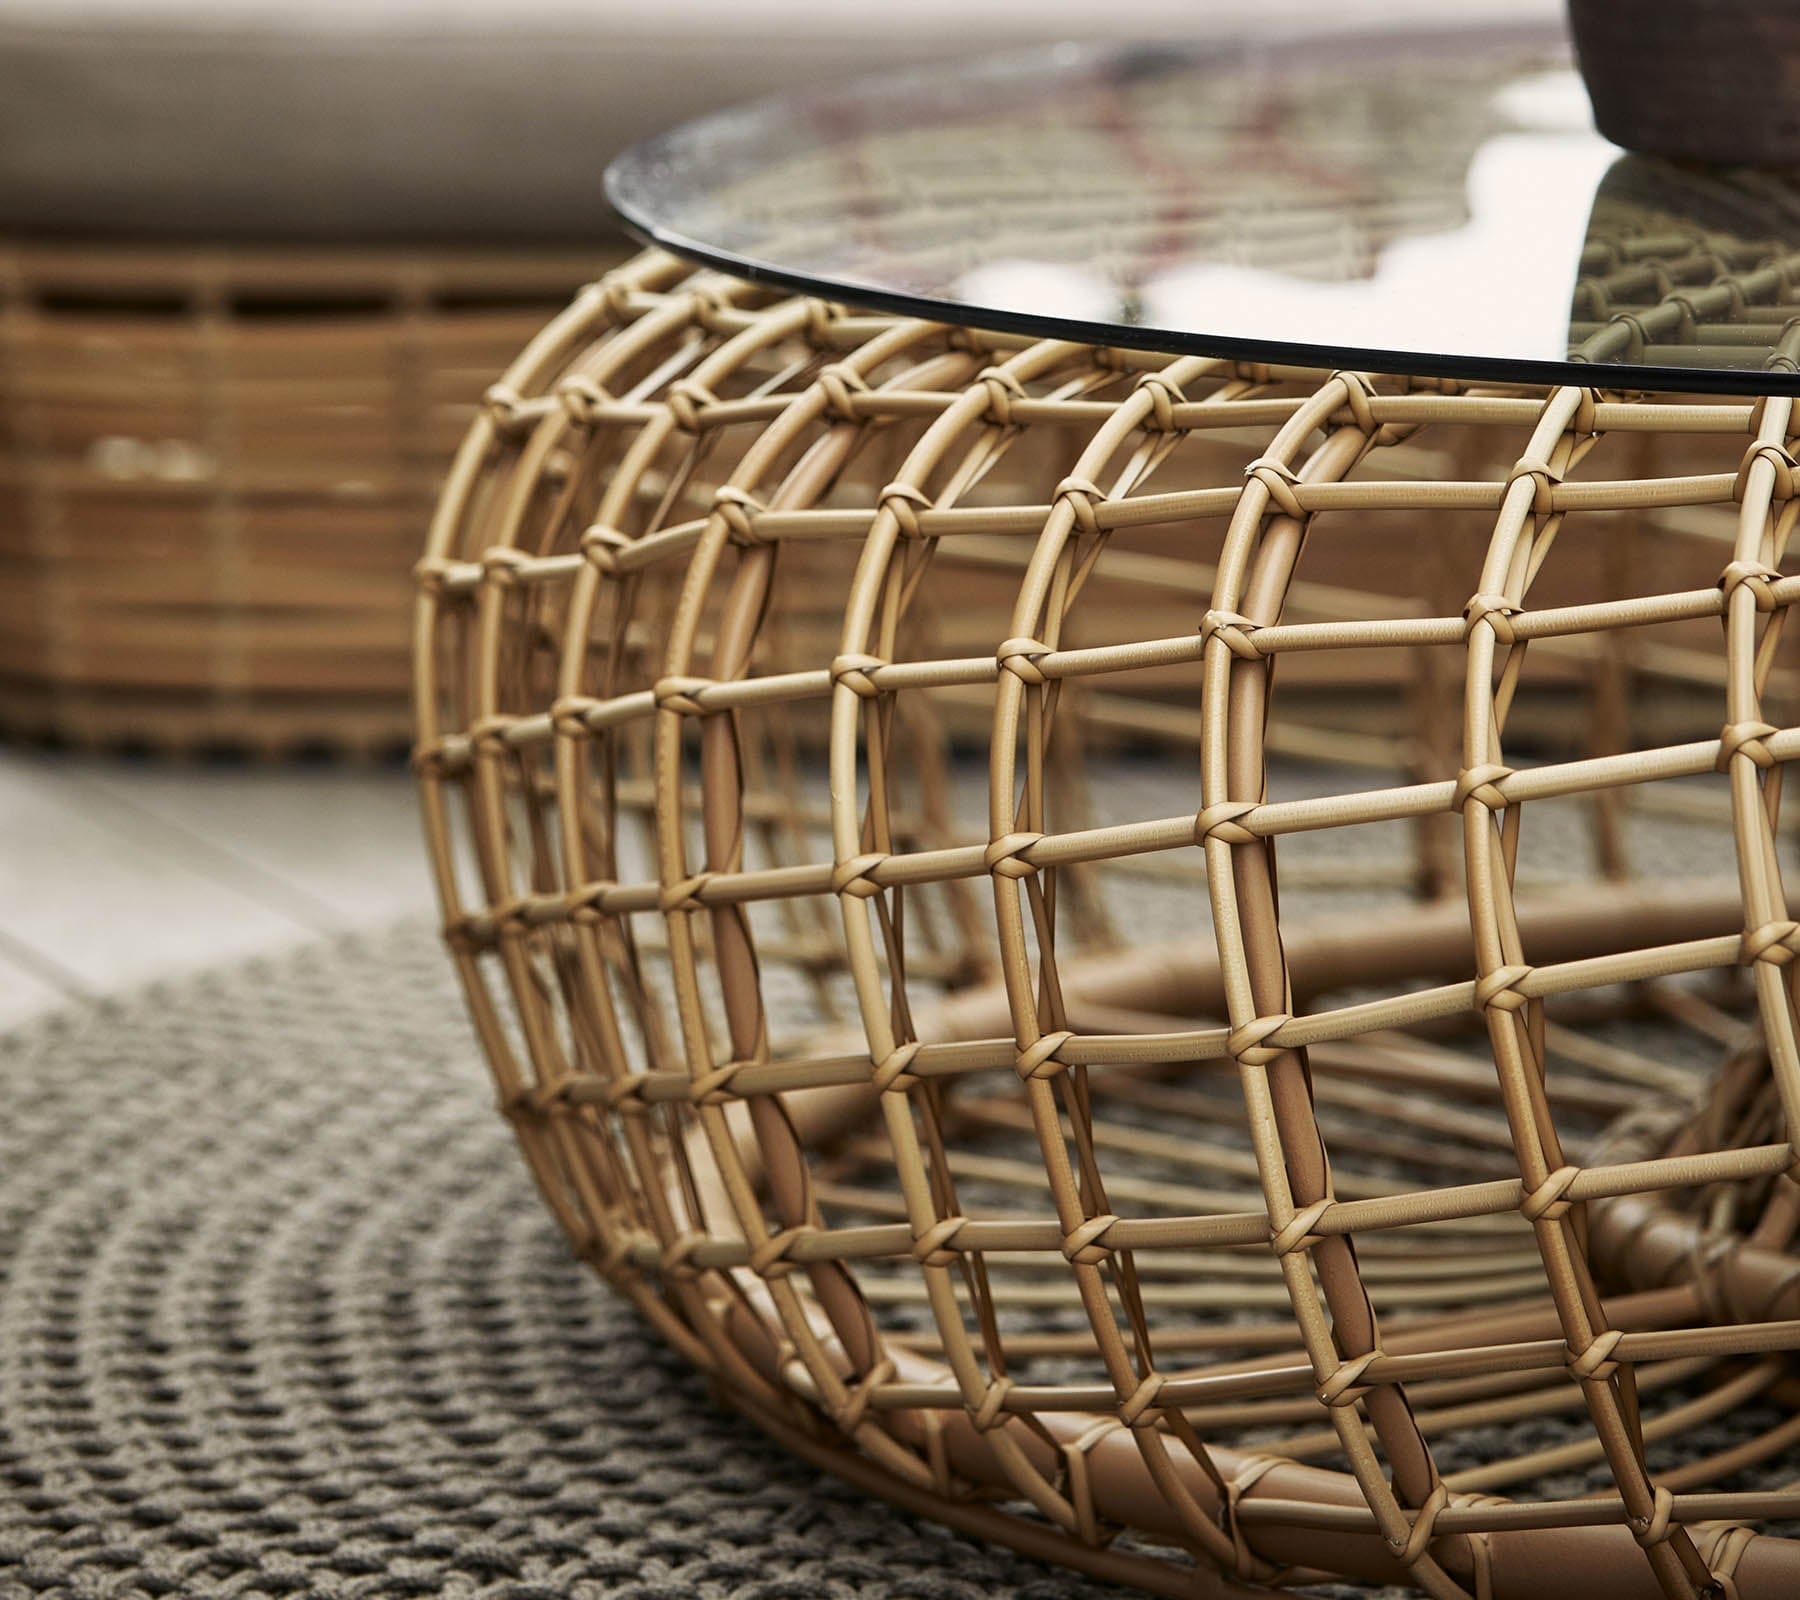 Boxhill's Nest Footstool/Coffee Table Outdoor Natural, Large with Table Top Safety Glass lifestyle image close up view